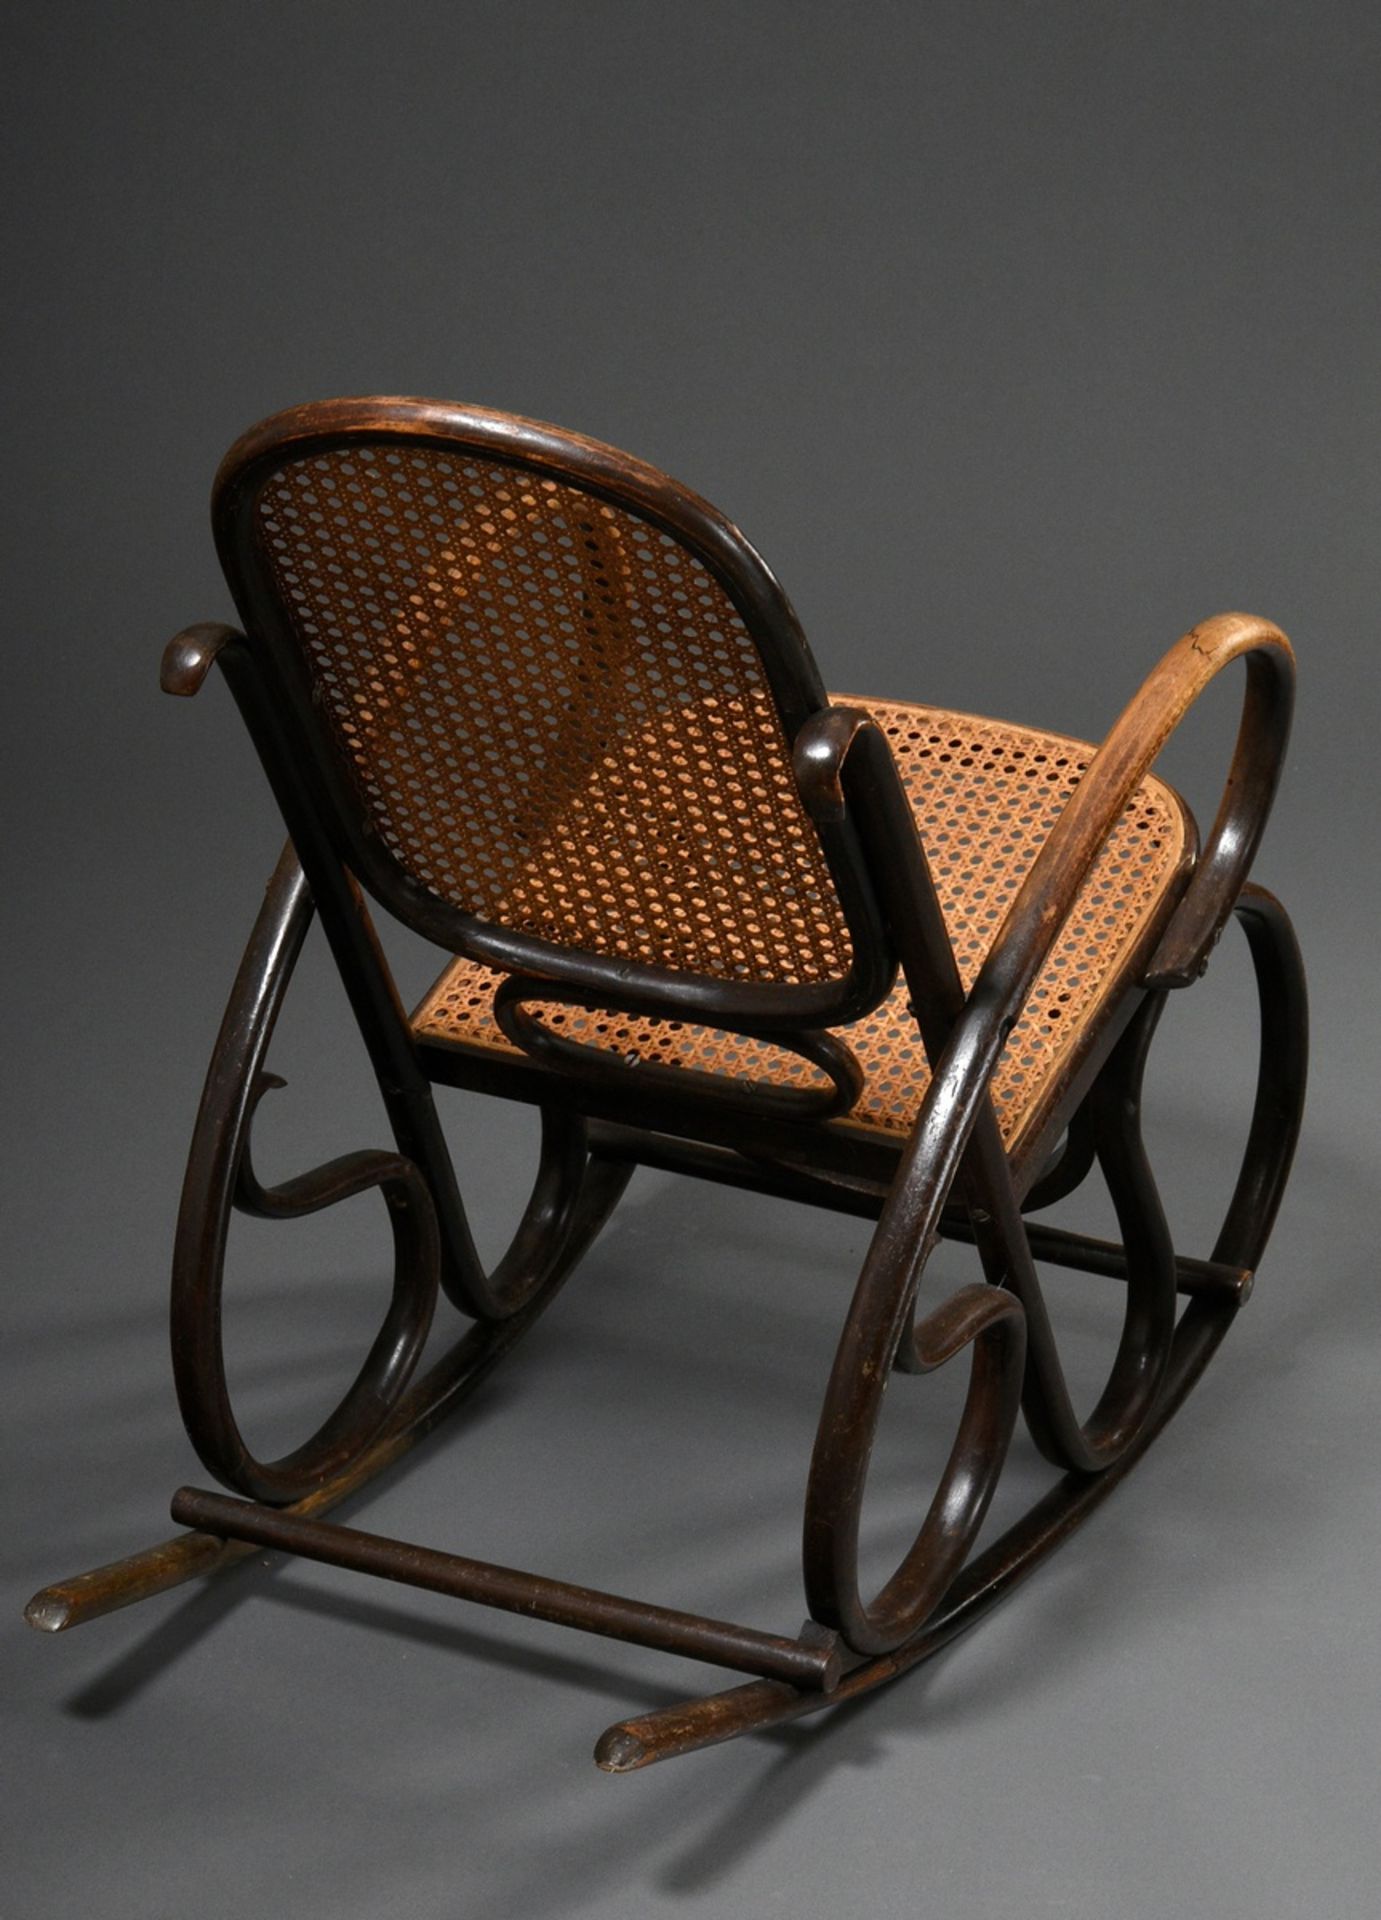 Art nouveau children's rocking chair in Thonet style, dark stained bentwood with wickerwork, h. 71, - Image 3 of 5